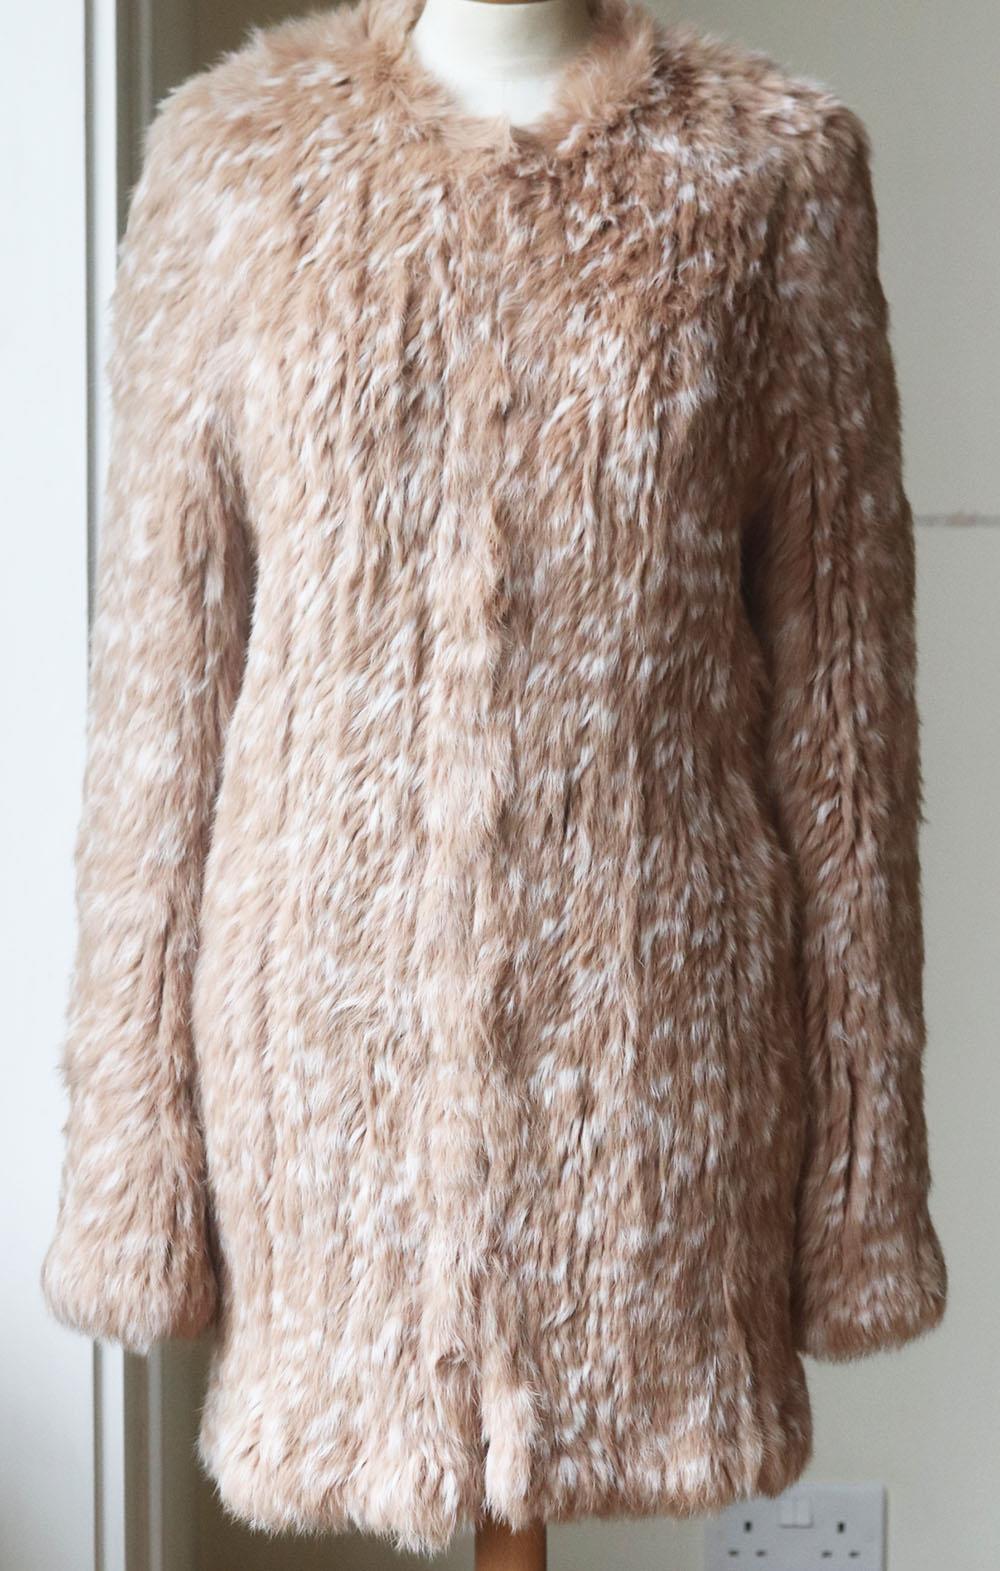 Ulla Johnson's 'Christa' animal-print knitted rabbit-fur coat made its debut for winter months, it's cut for a loose fit, which means you can layer it over knitwear without feeling restricted. Beige, white and brown rabbit-fur. Hook fastening at